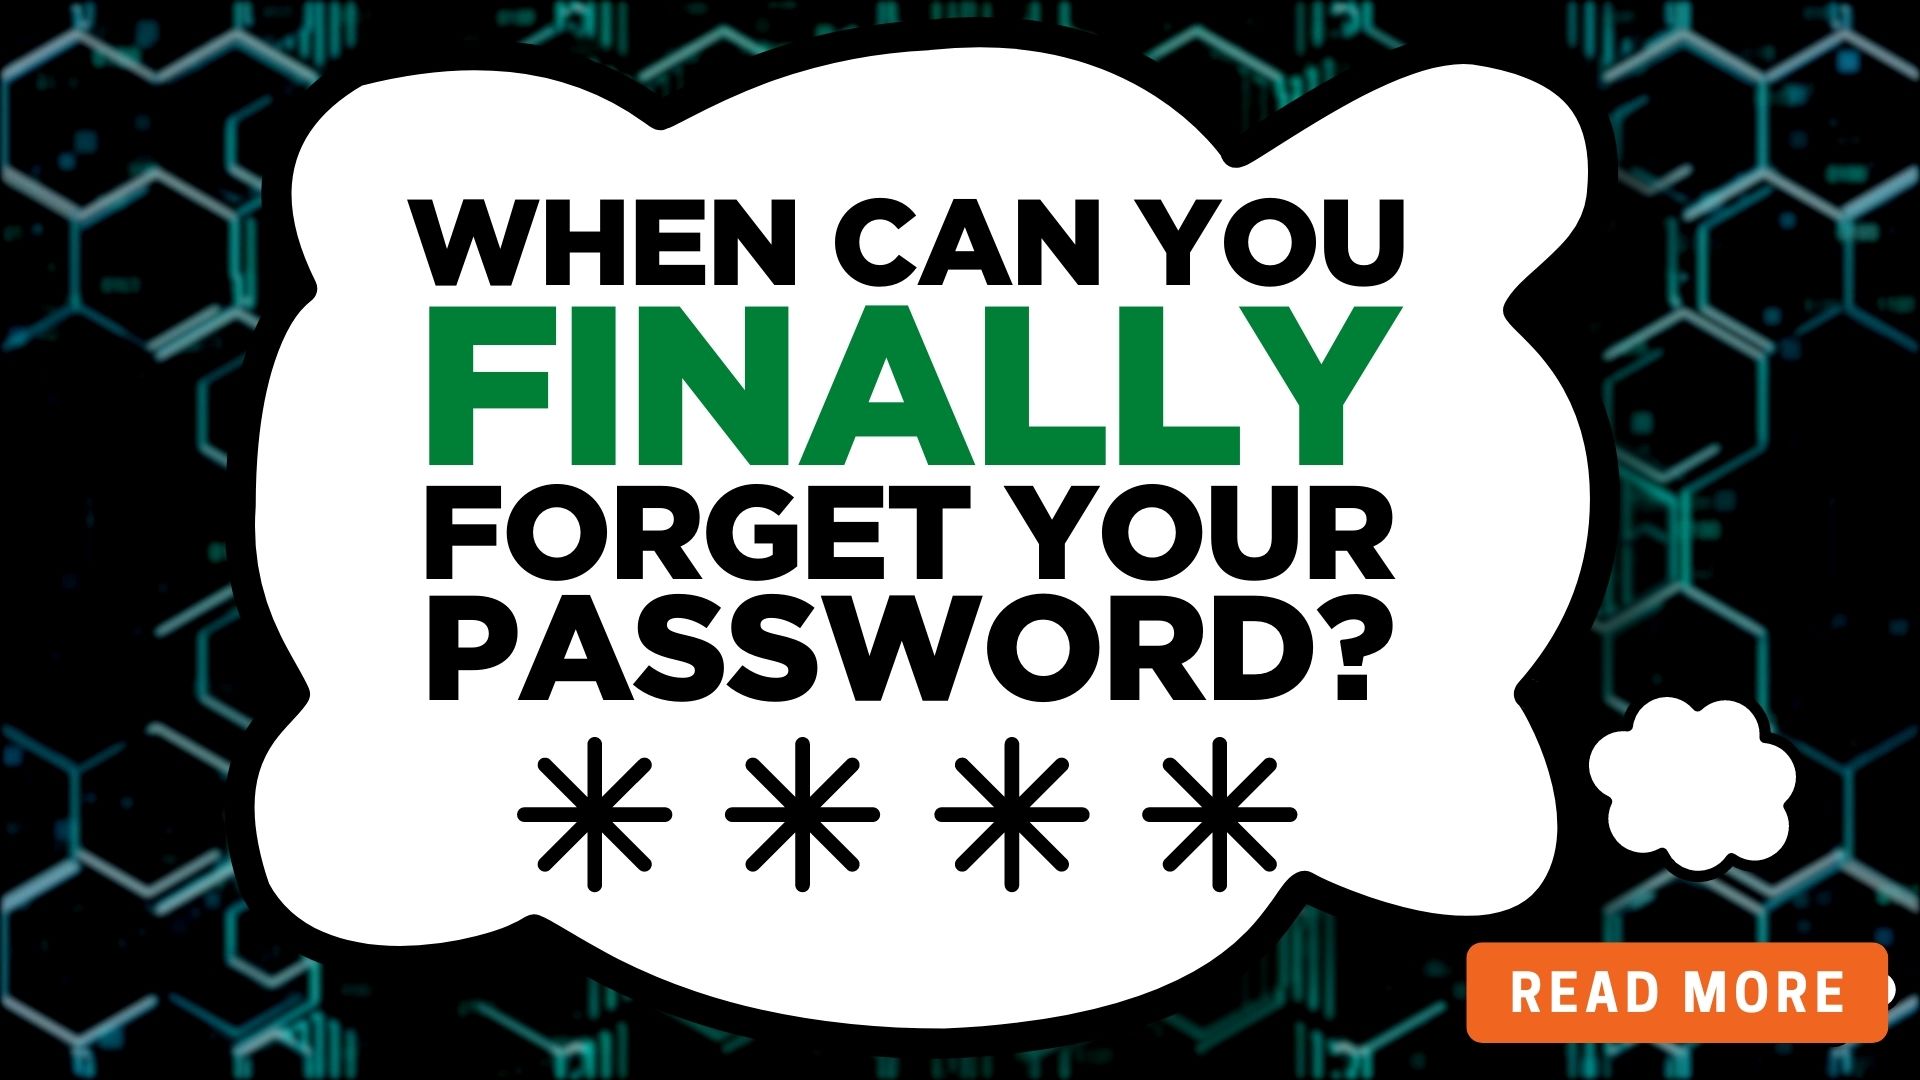 When can you finally forget your password?